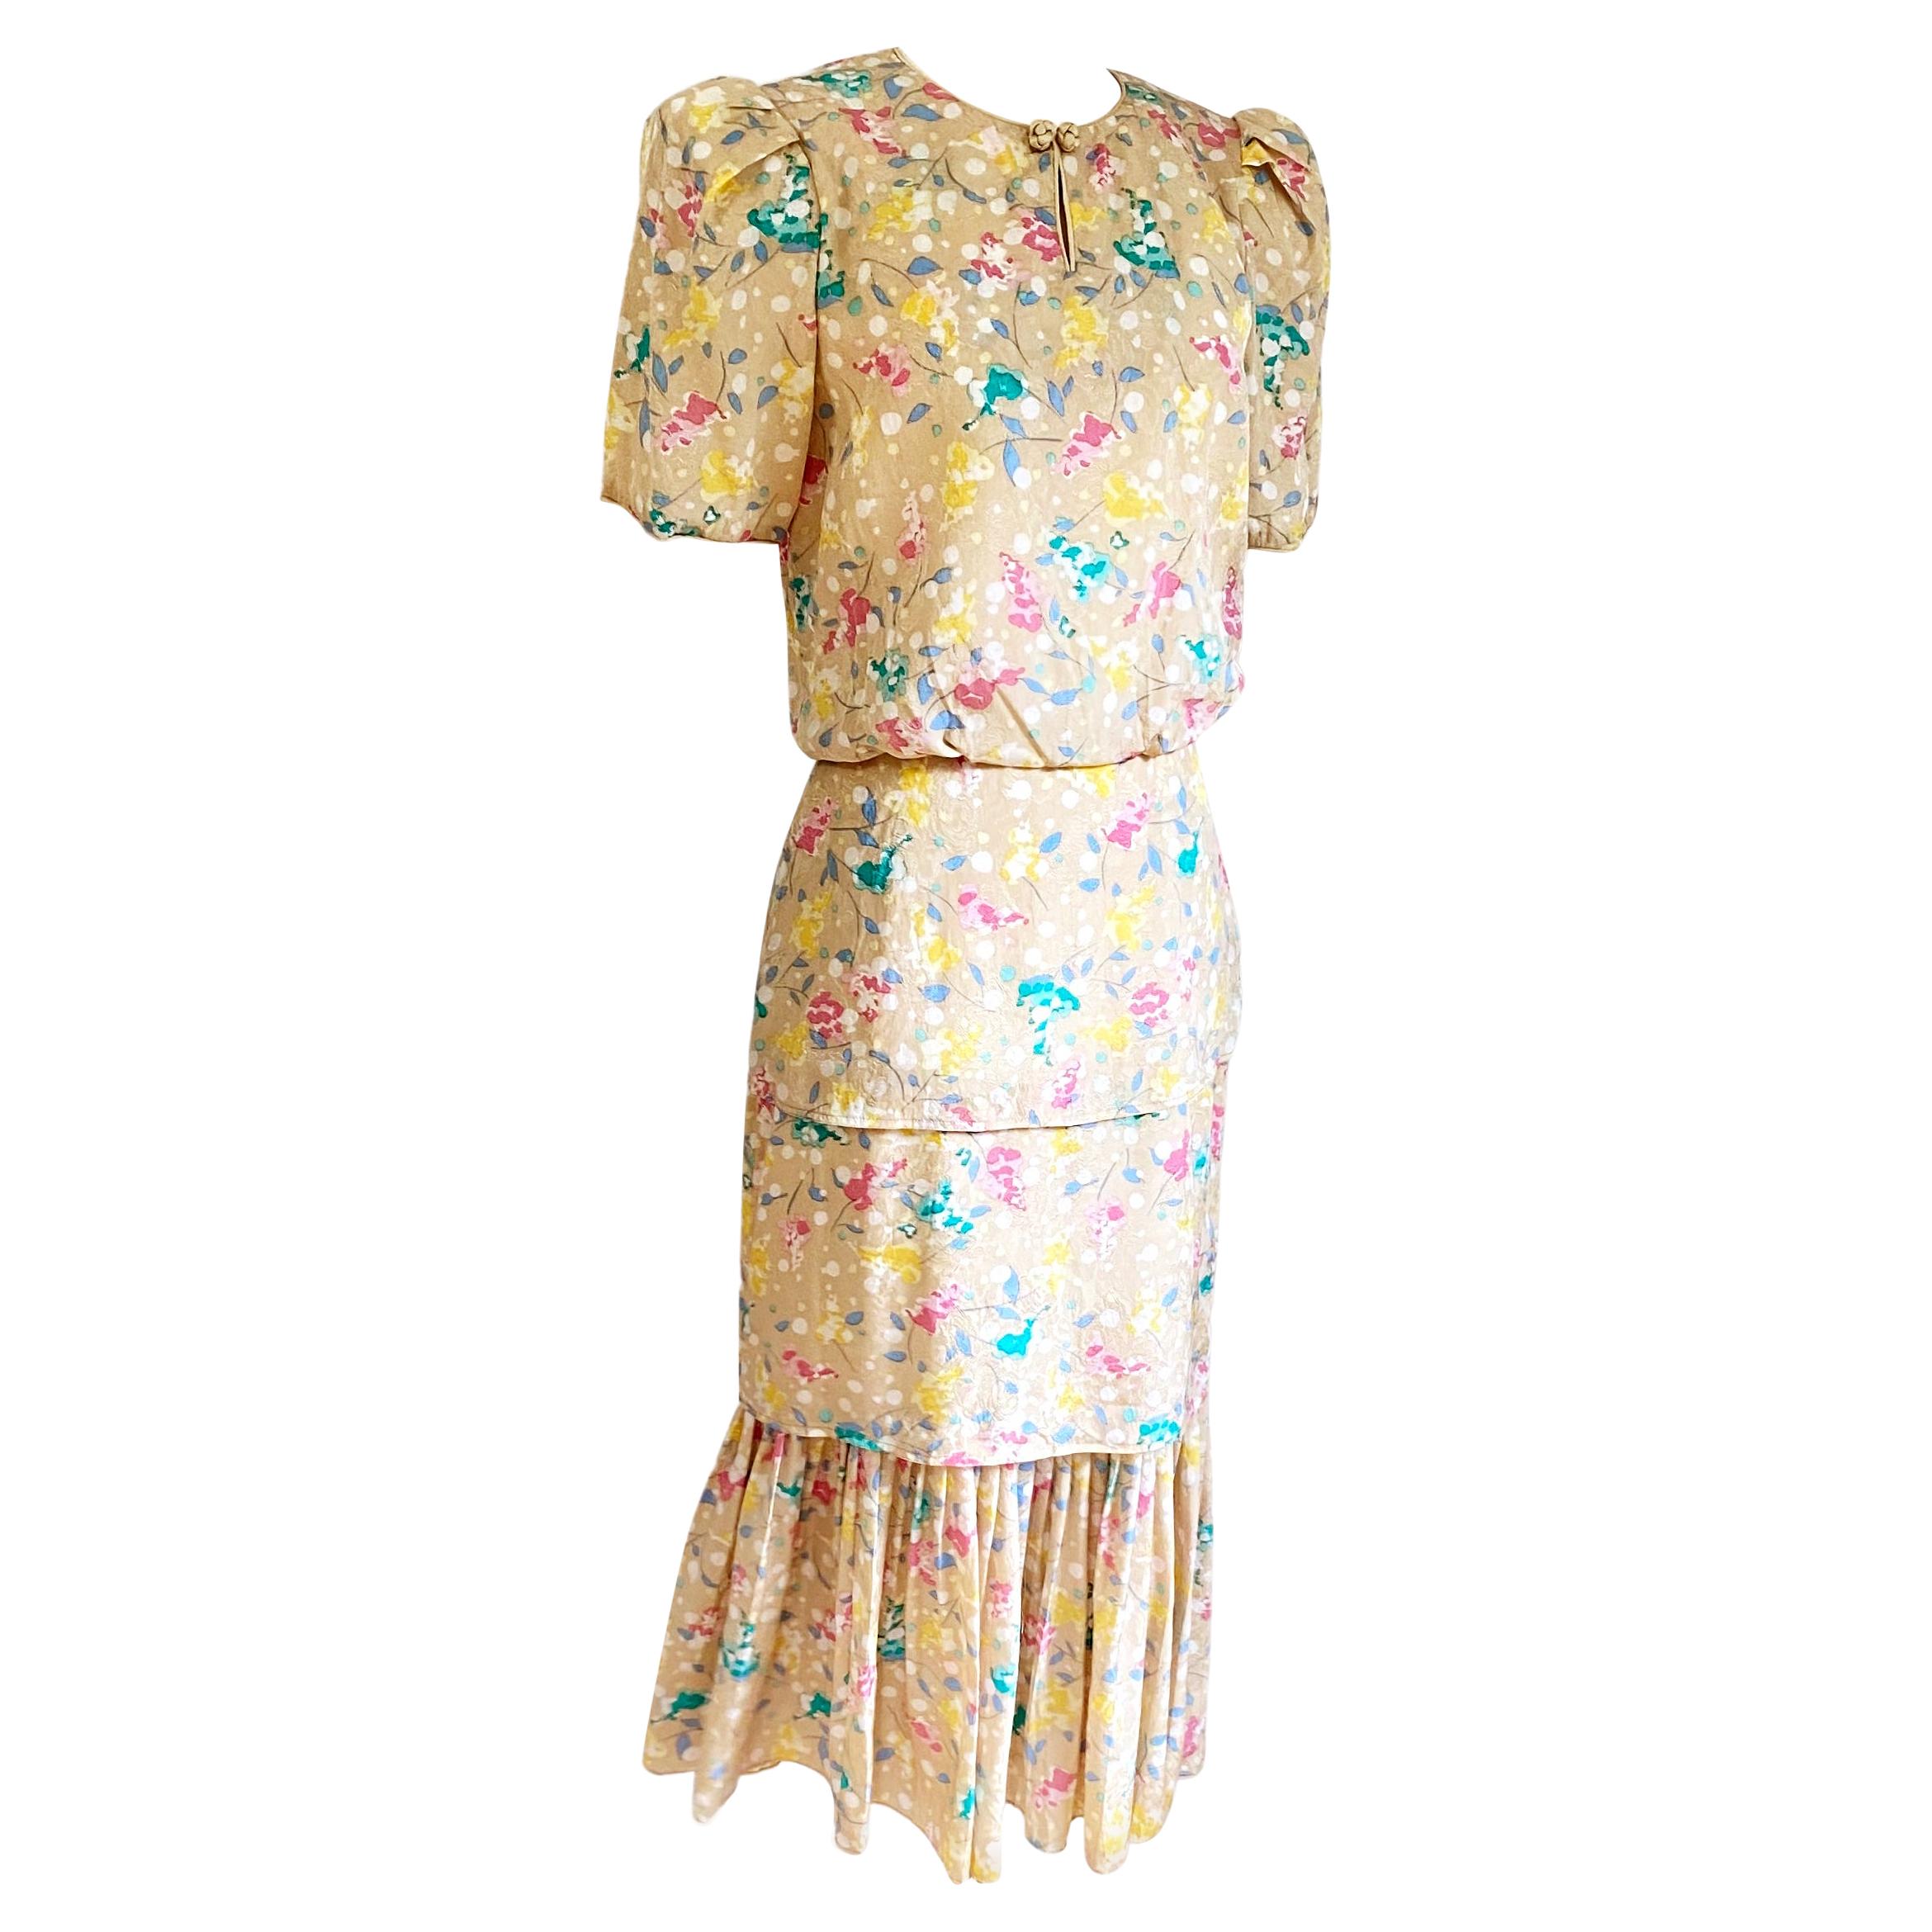 New with tag.

3-tier lined floral silk jacquard dress in almond color exclusive print.

Couture details include: find piping, silk cord frog button closure, hidden side zipper.

Approximately 53.5